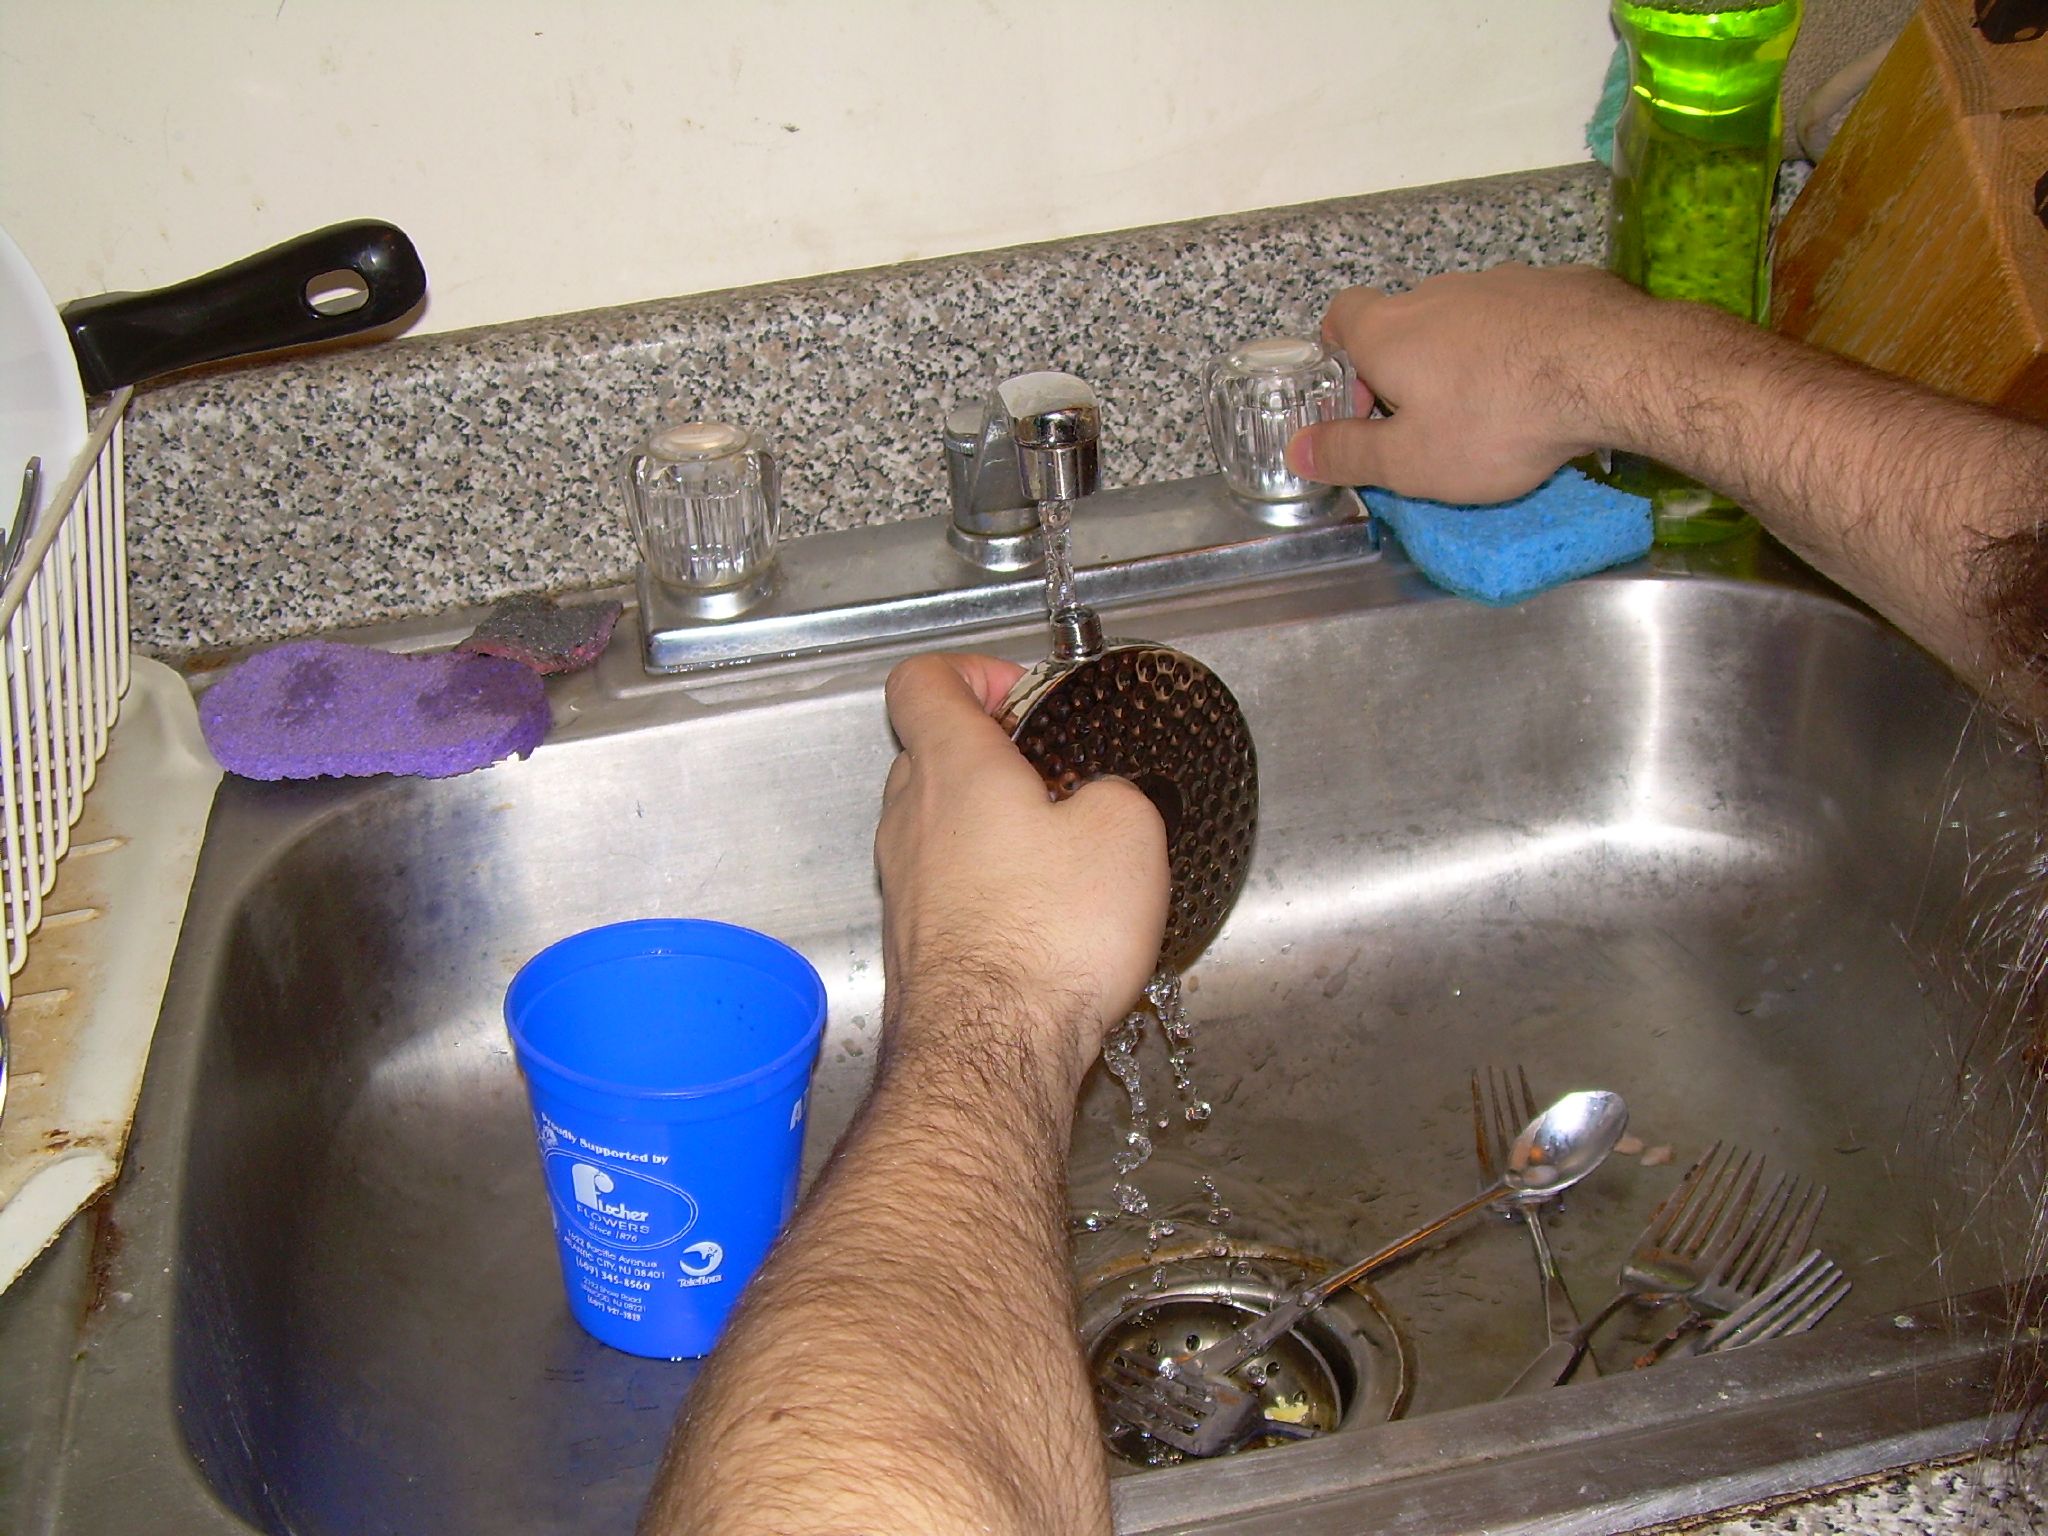 a person is washing dishes in a sink